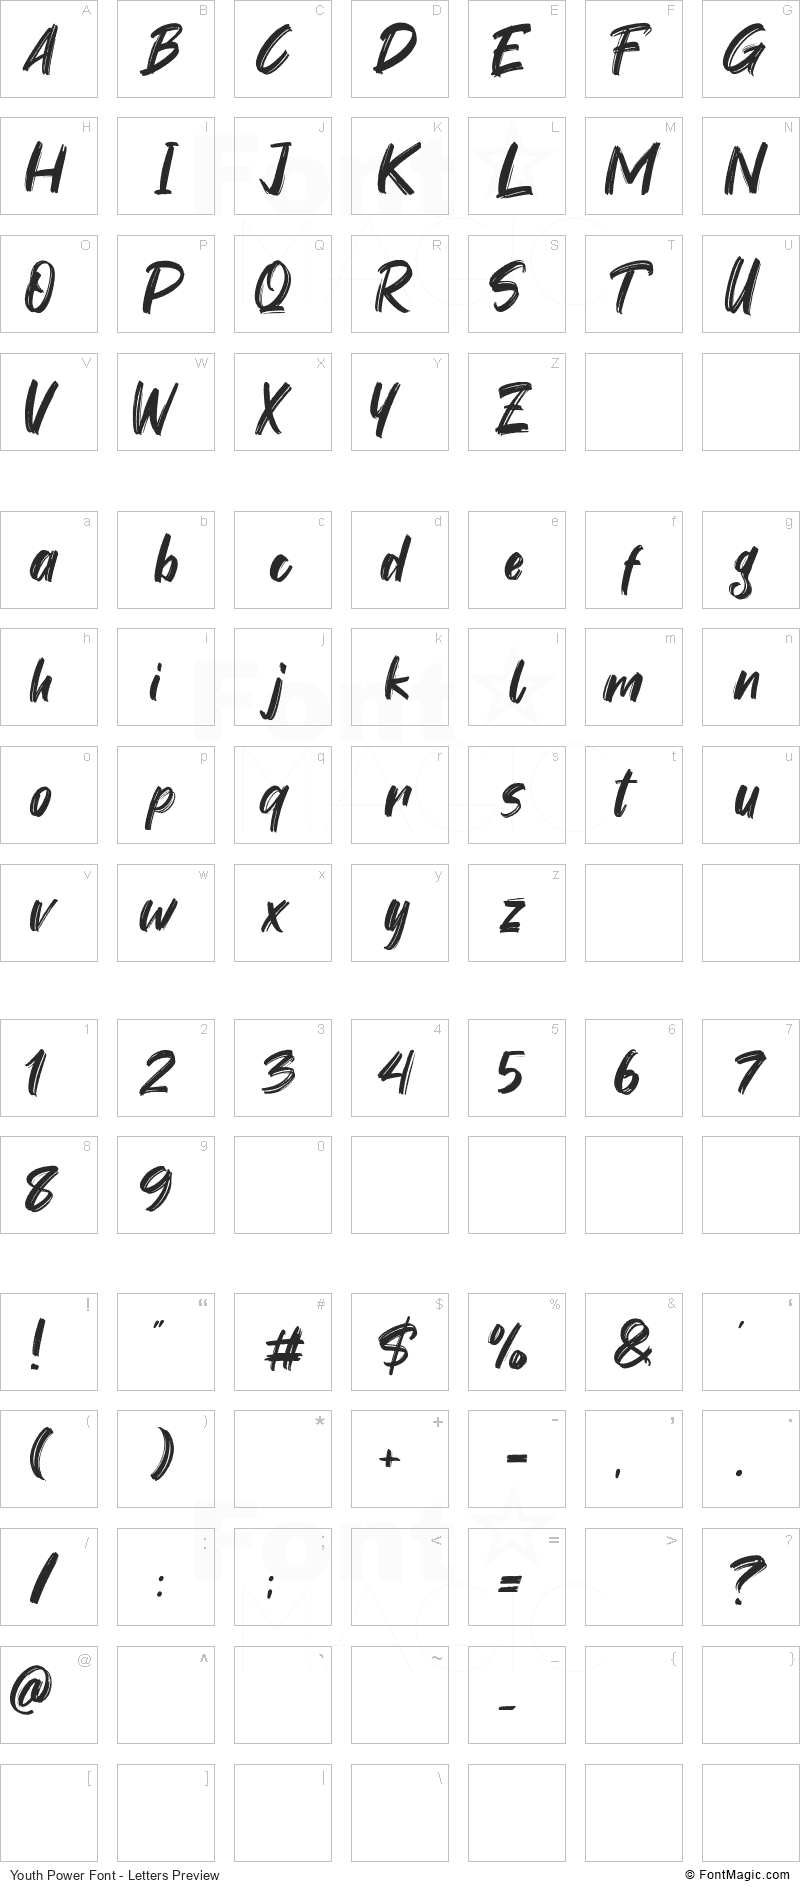 Youth Power Font - All Latters Preview Chart